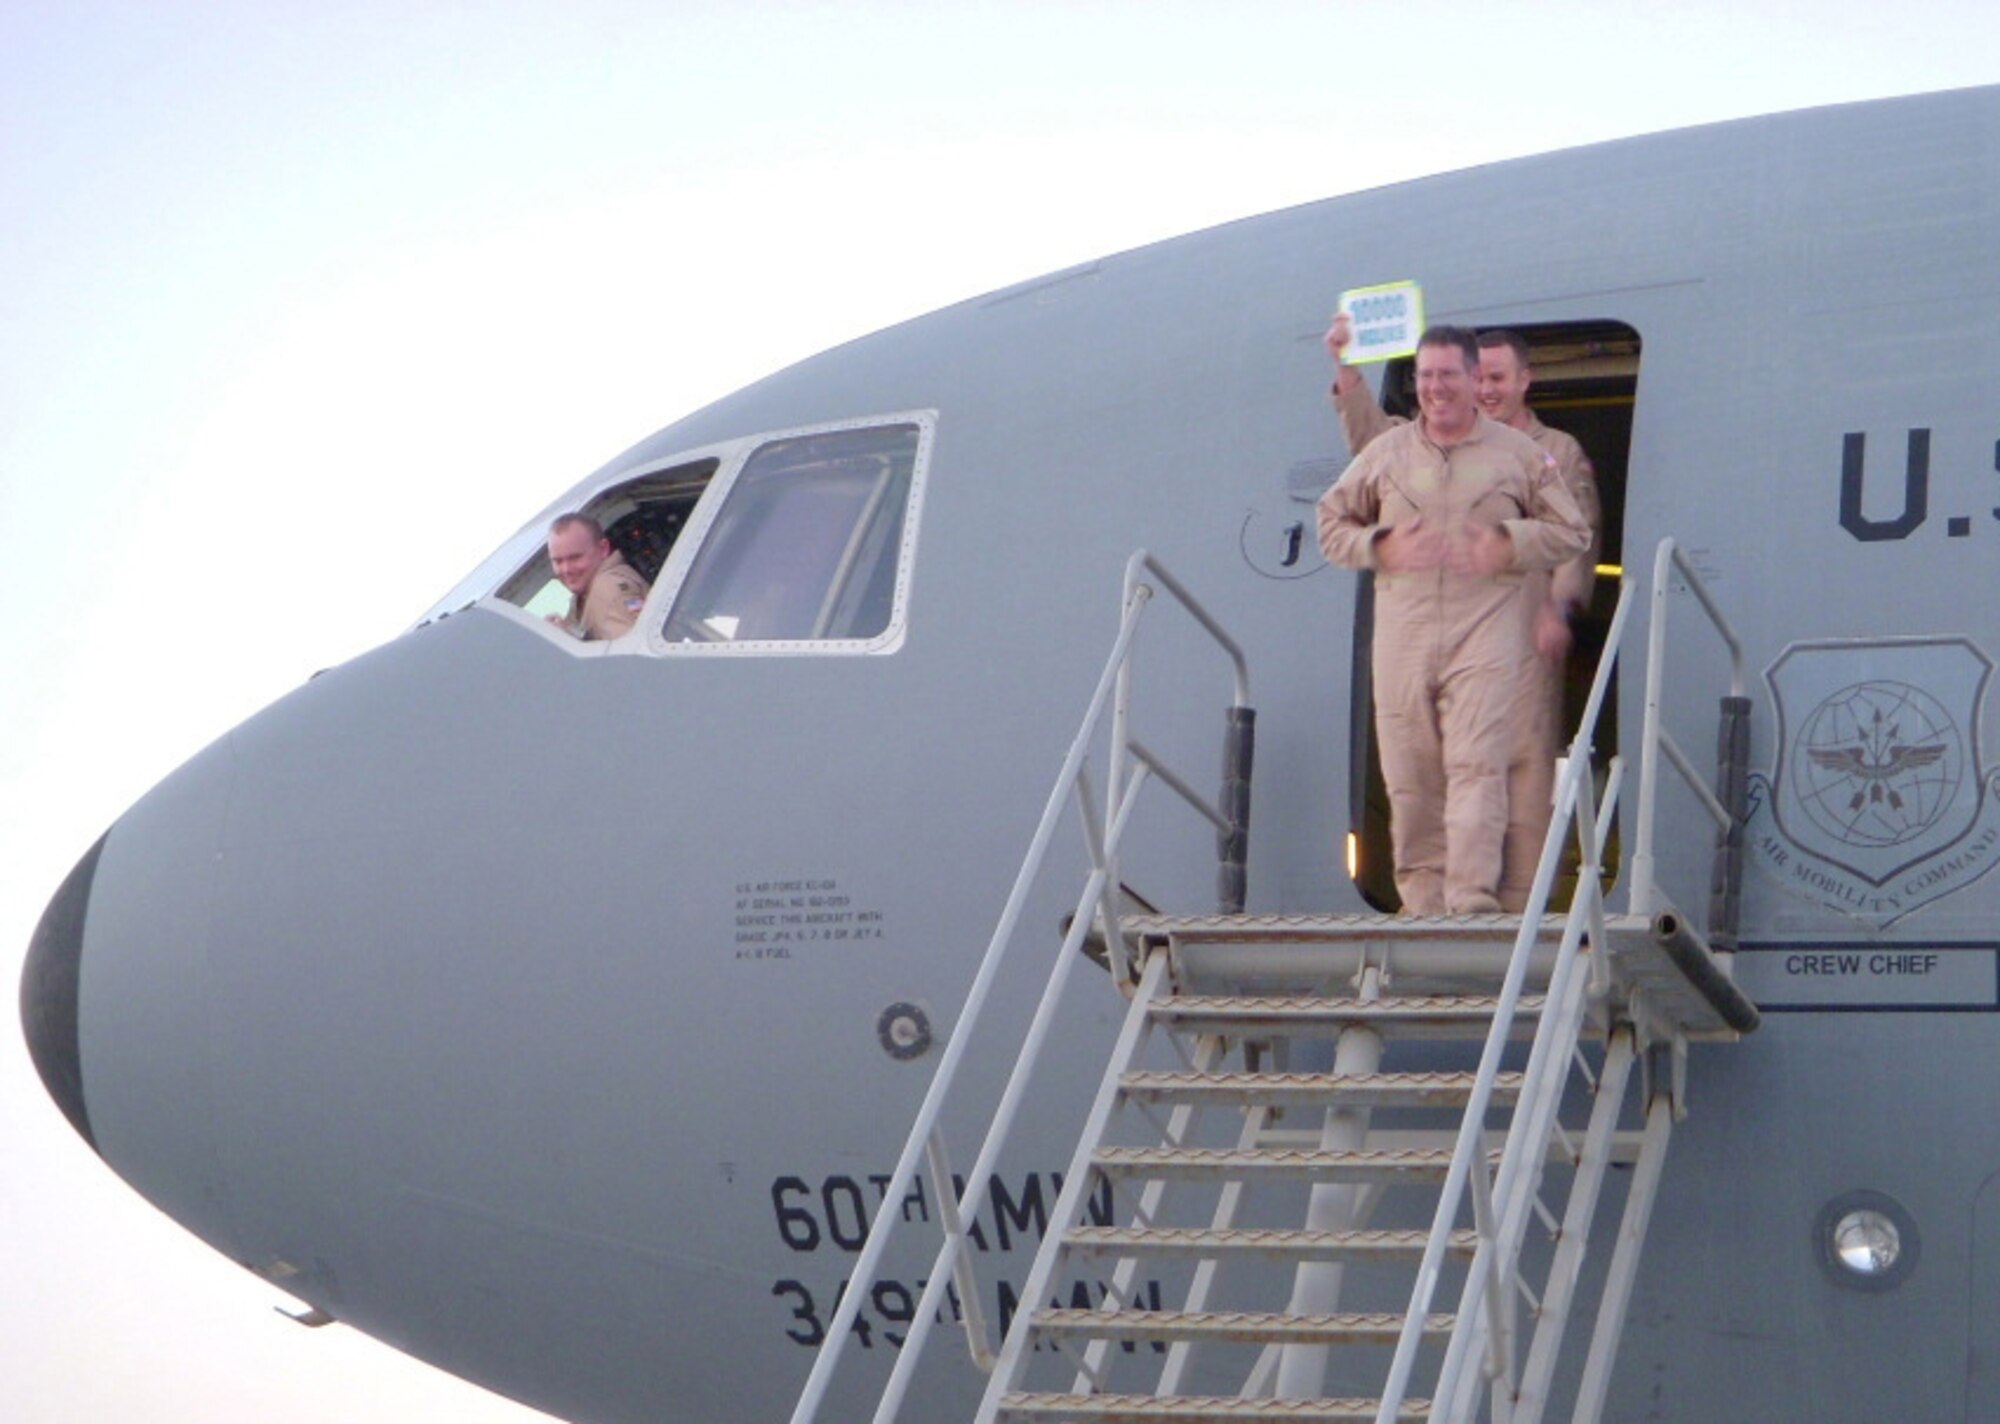 Senior MSgt Robert Fisher, 908th Expeditionary Air Refueling Squadron Flight Engineer, steps off a KC-10 Extender after his landmark flight, surpassing 10,000 flight hours March 29, 2008.  (U.S. Air Force photo)